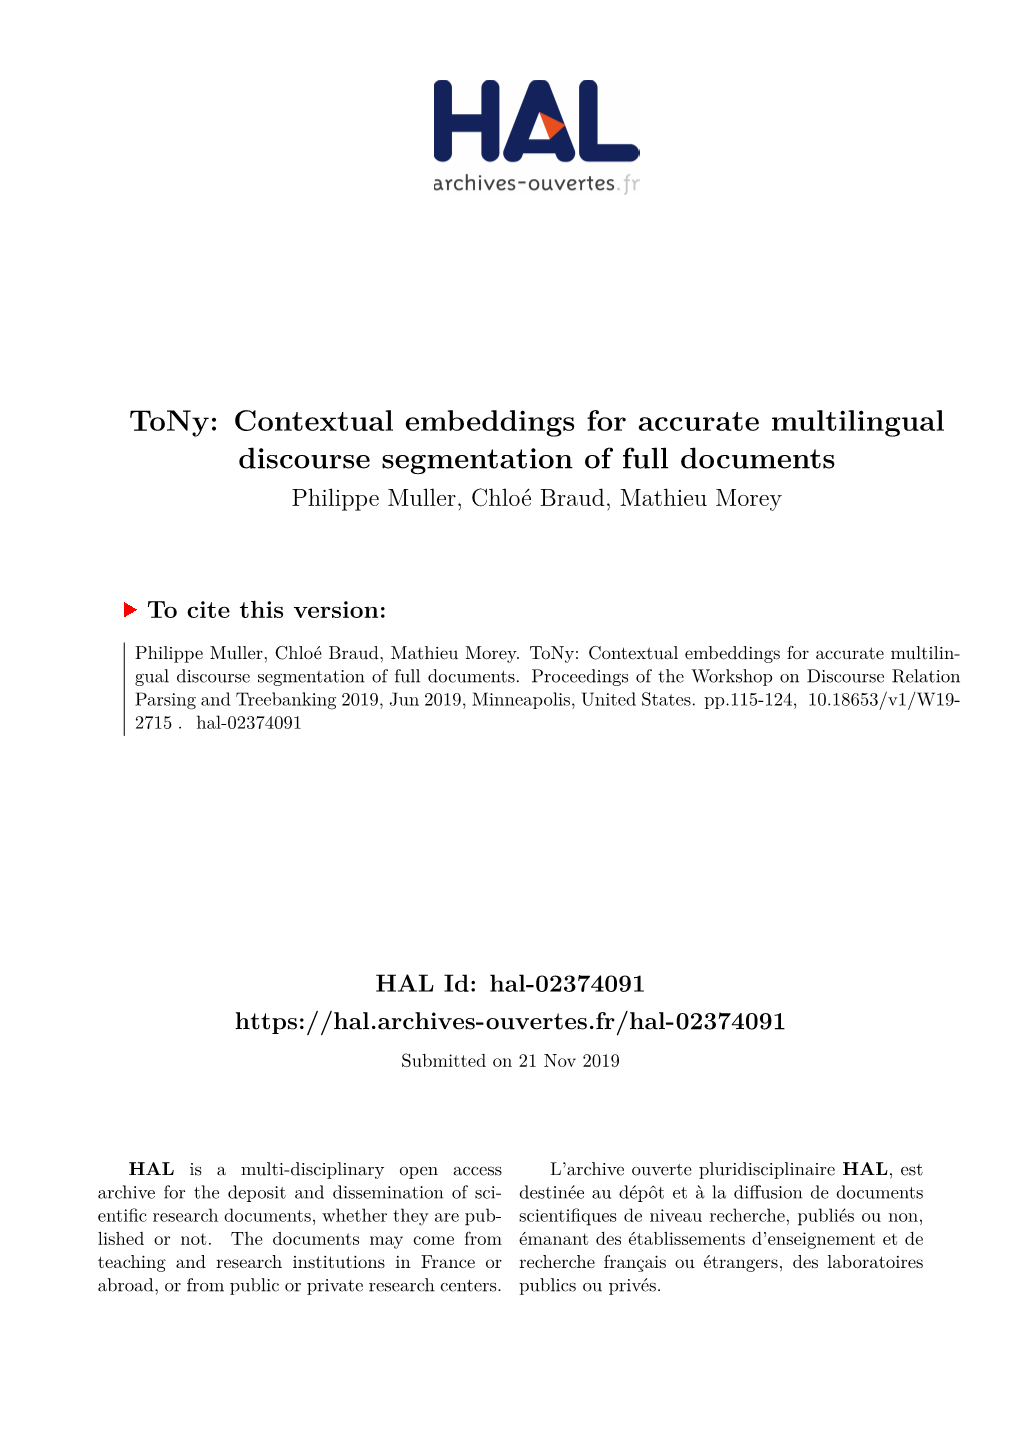 Tony: Contextual Embeddings for Accurate Multilingual Discourse Segmentation of Full Documents Philippe Muller, Chloé Braud, Mathieu Morey